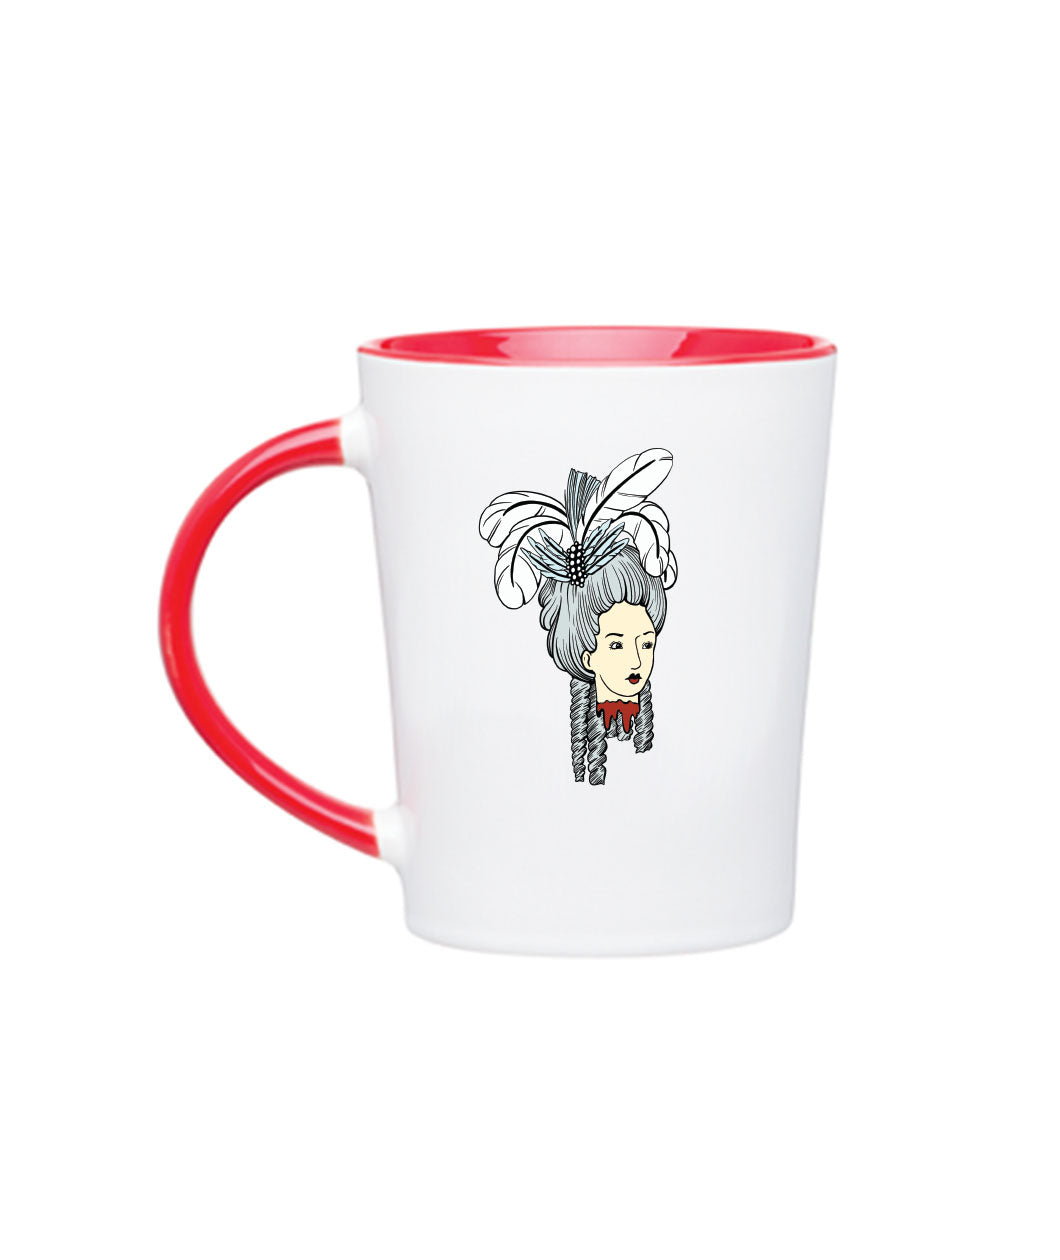 A Noble Blood white mug with red interior and handle. On the front of the mug is Marie Antoinette's head adorned with feathers with a bloody neck.